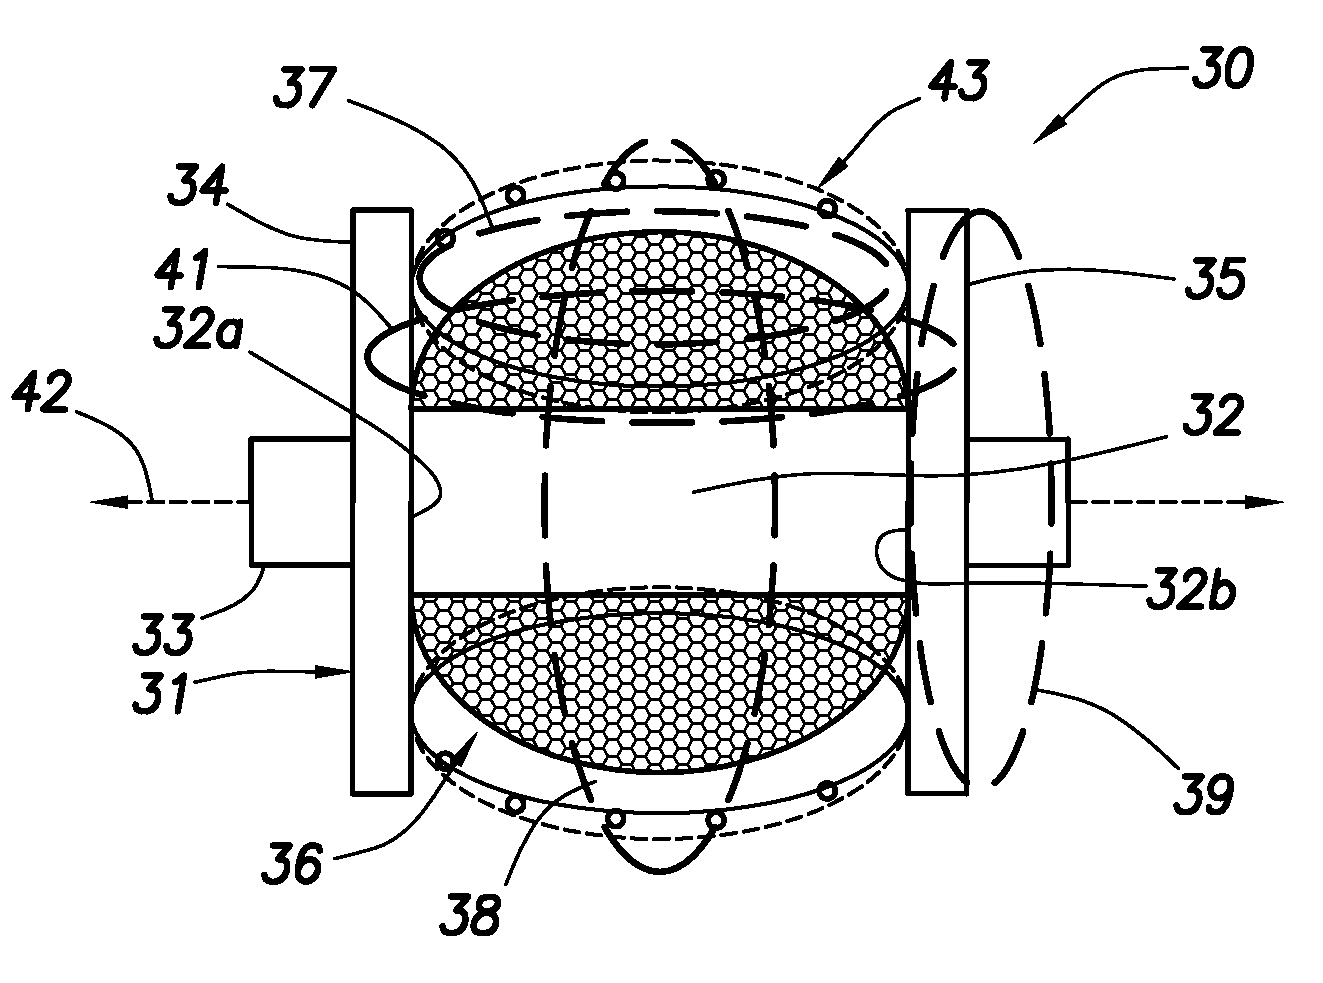 Antennas for deep induction array tools with increased sensitivities